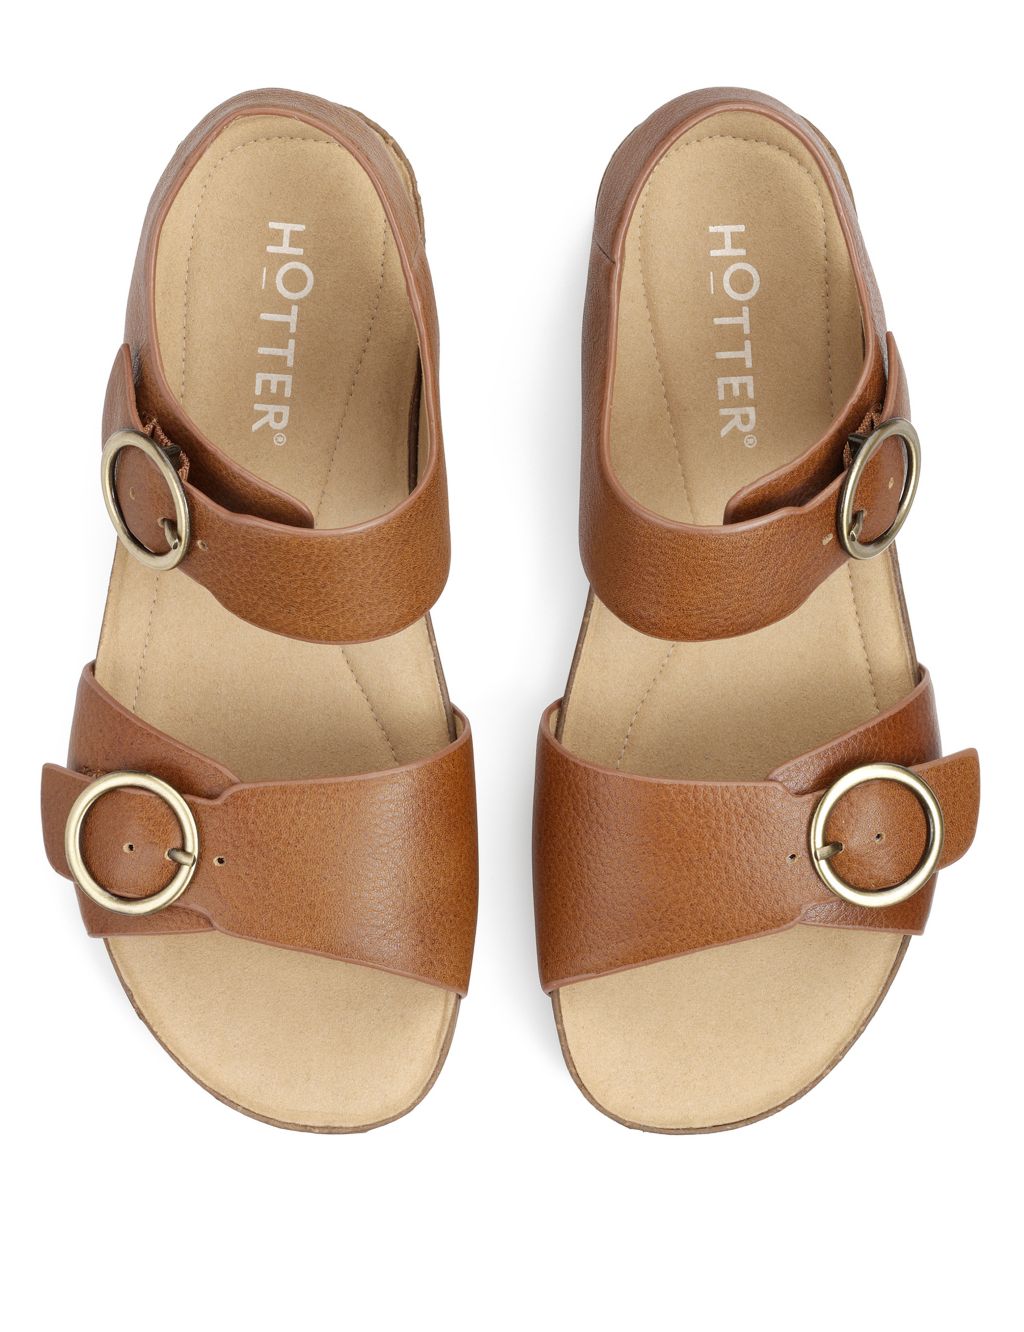 Tourist Wide Fit Leather Wedge Sandals image 2